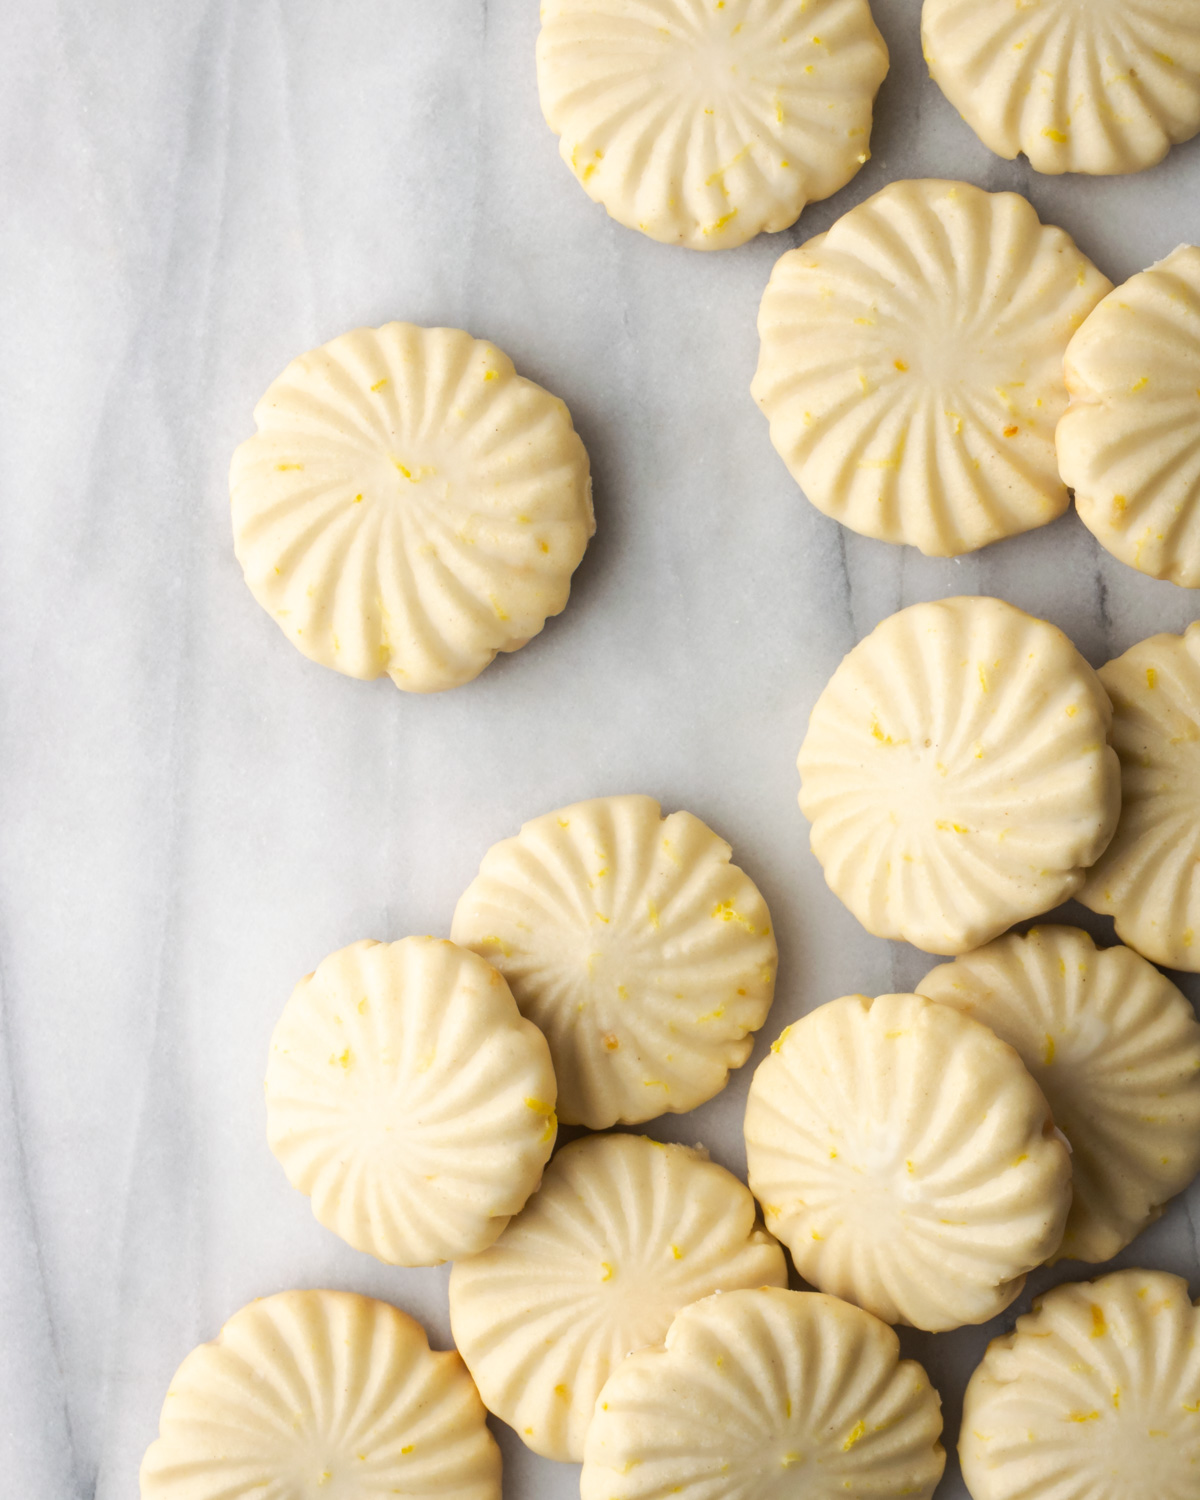 Lemon cookies scattered on a marble counter.